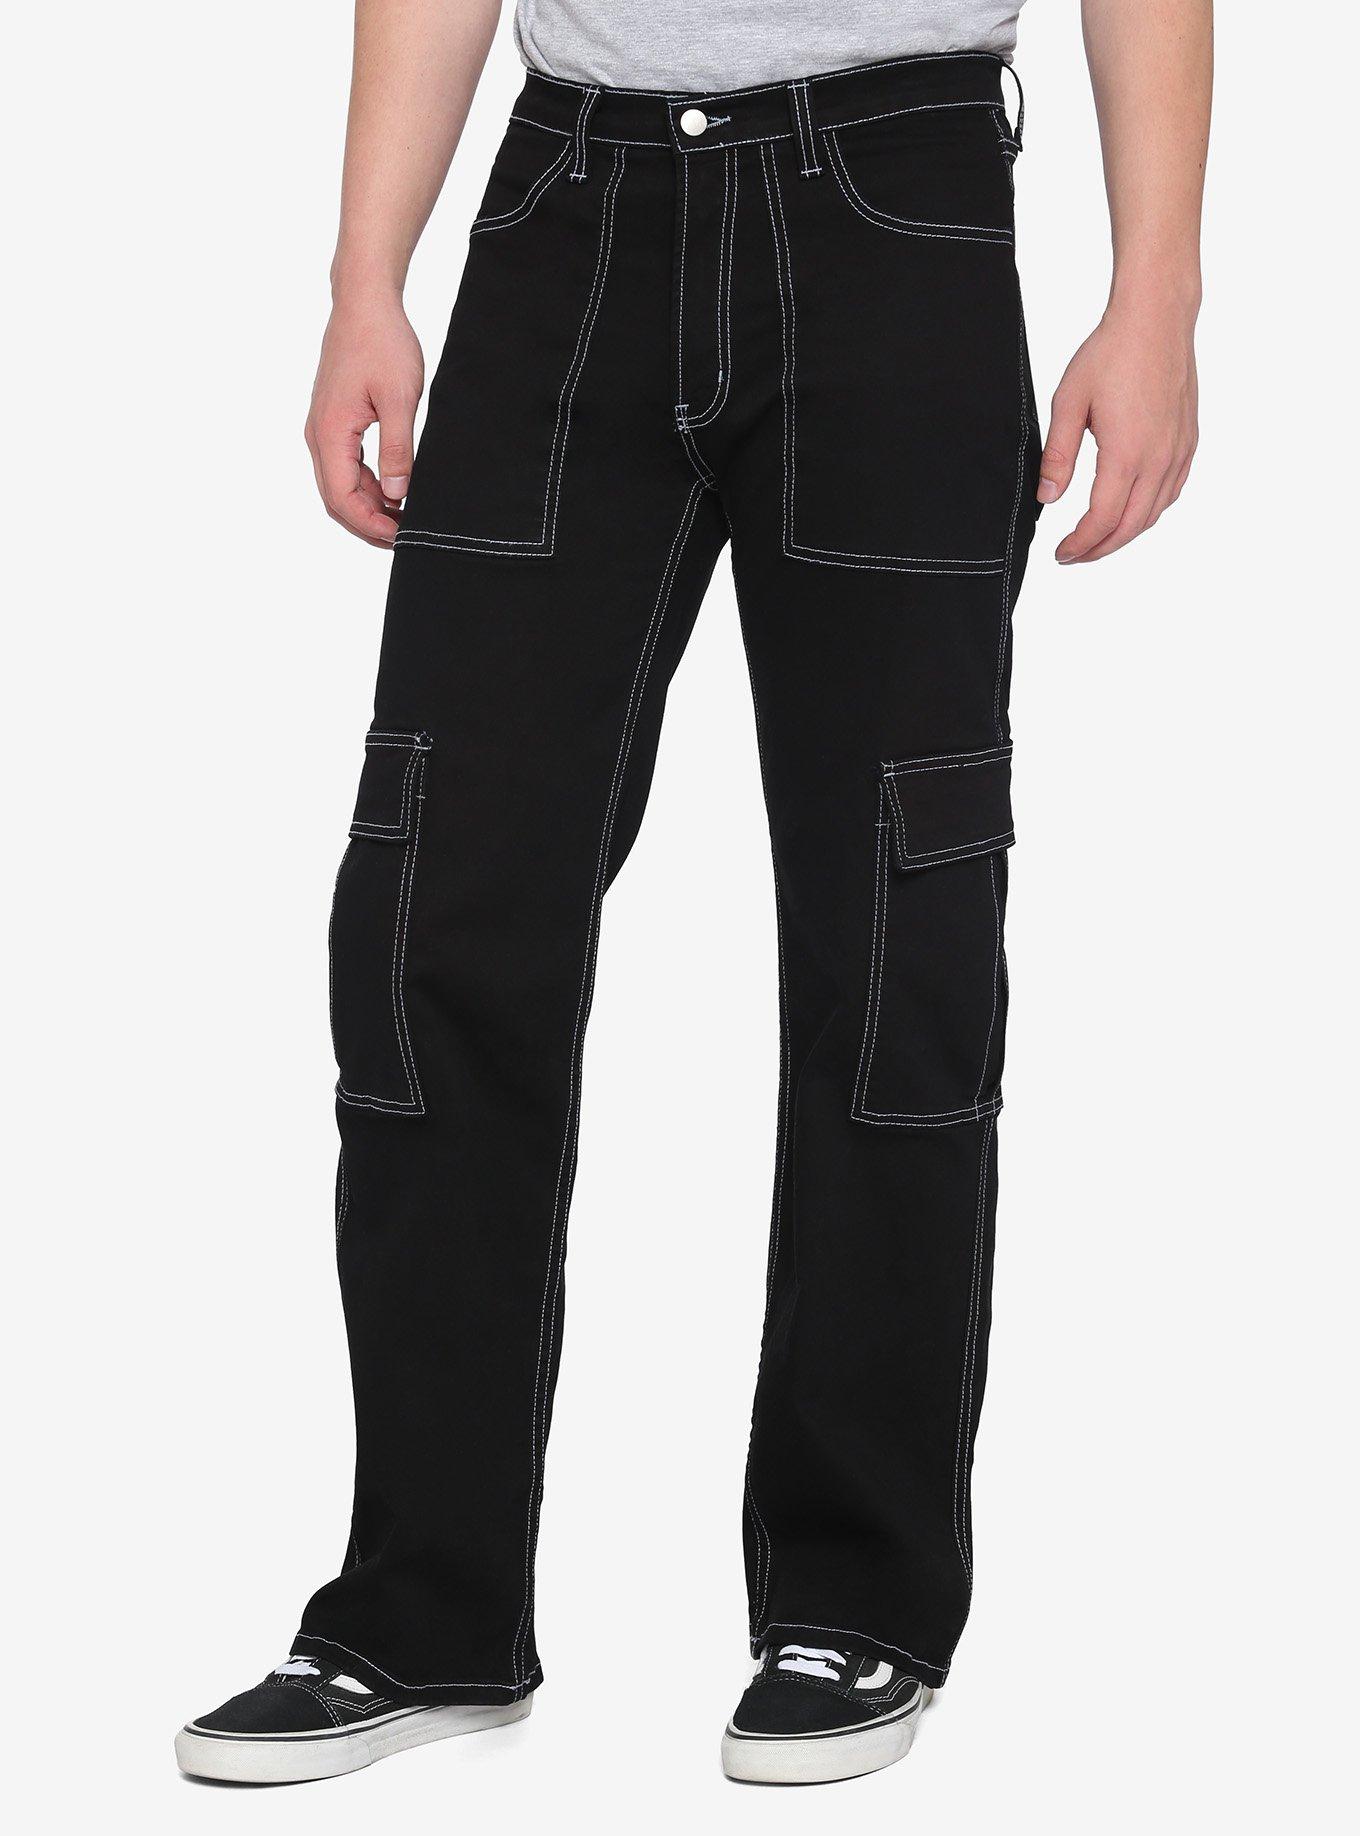 Black With White Stitch Carpenter Pants | Hot Topic